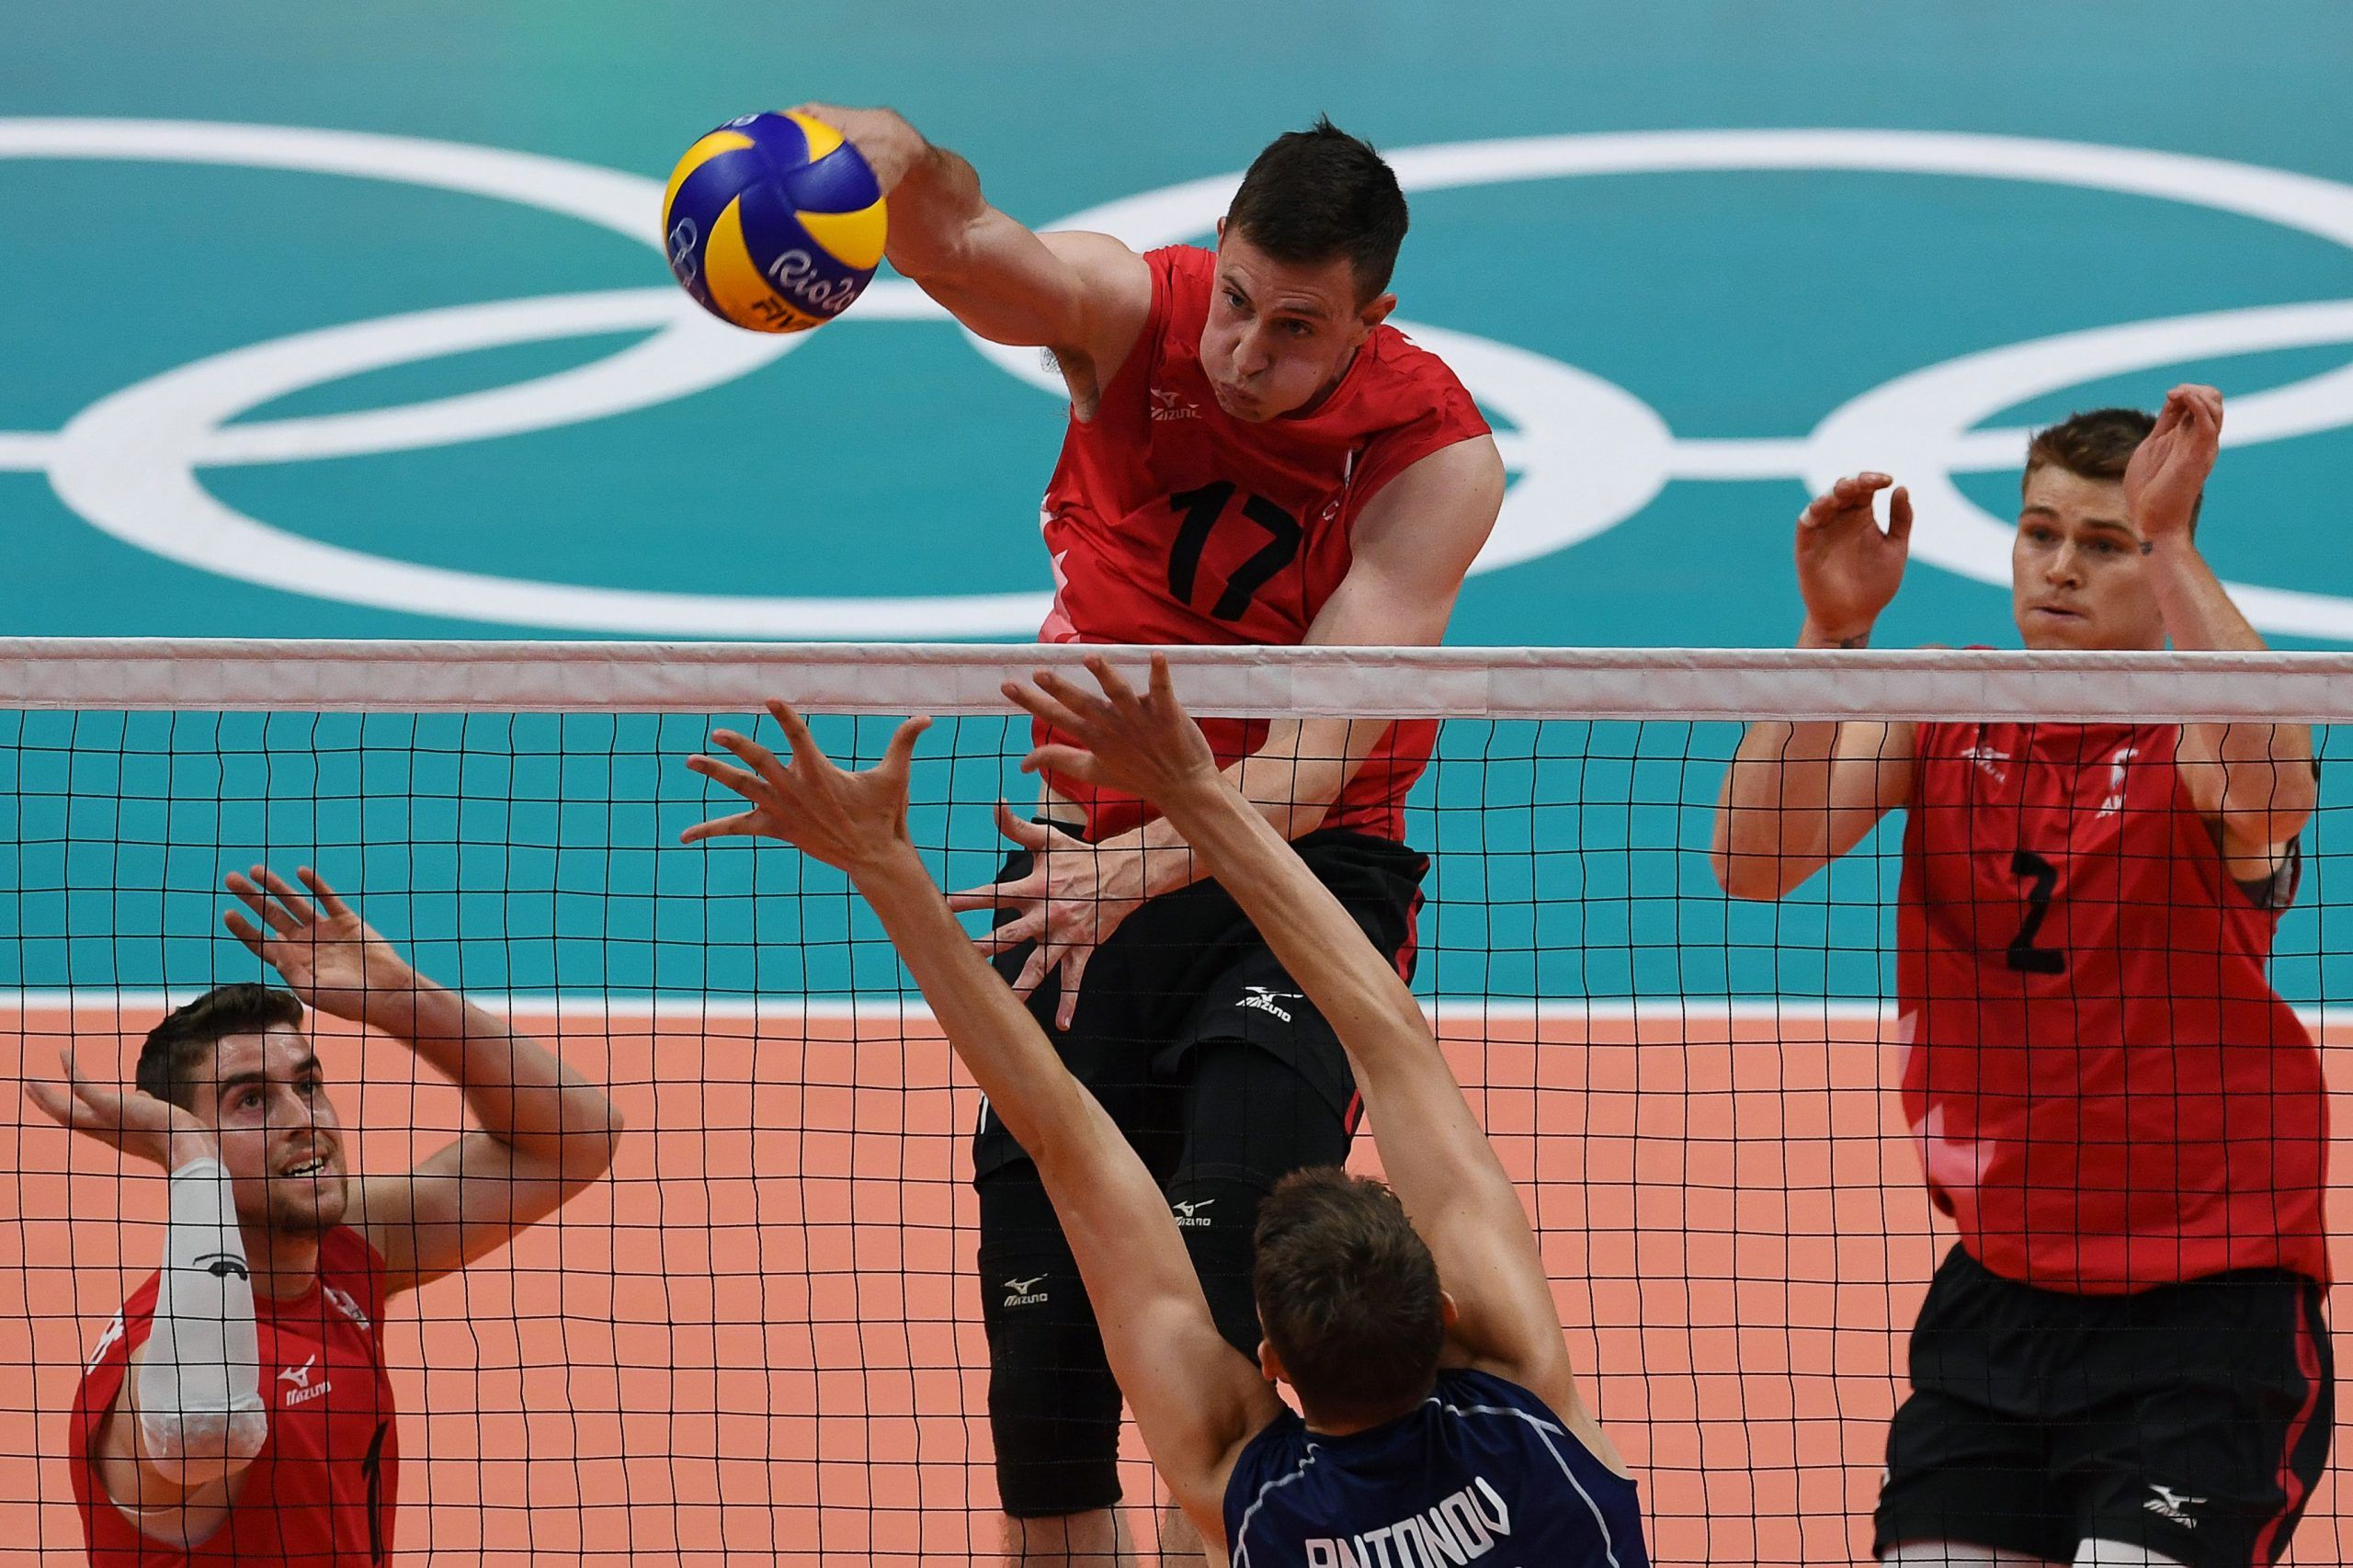 Canada S Men S Volleyball Team Is Back On The Olympic Stage Is The Podium In Their Future